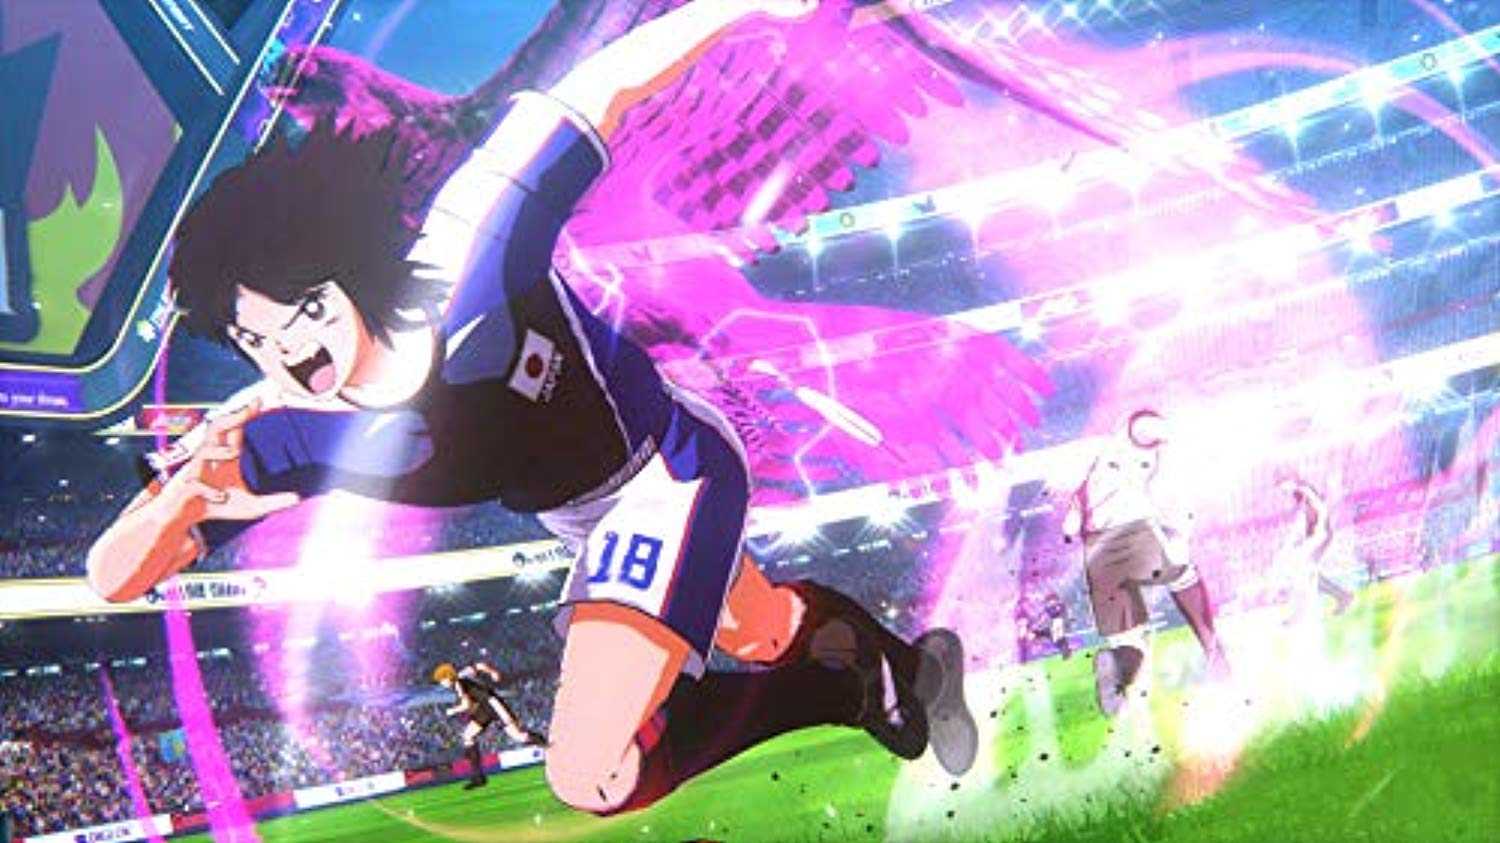 Captain Tsubasa: Rise of New Champions (PS4) - Offer Games